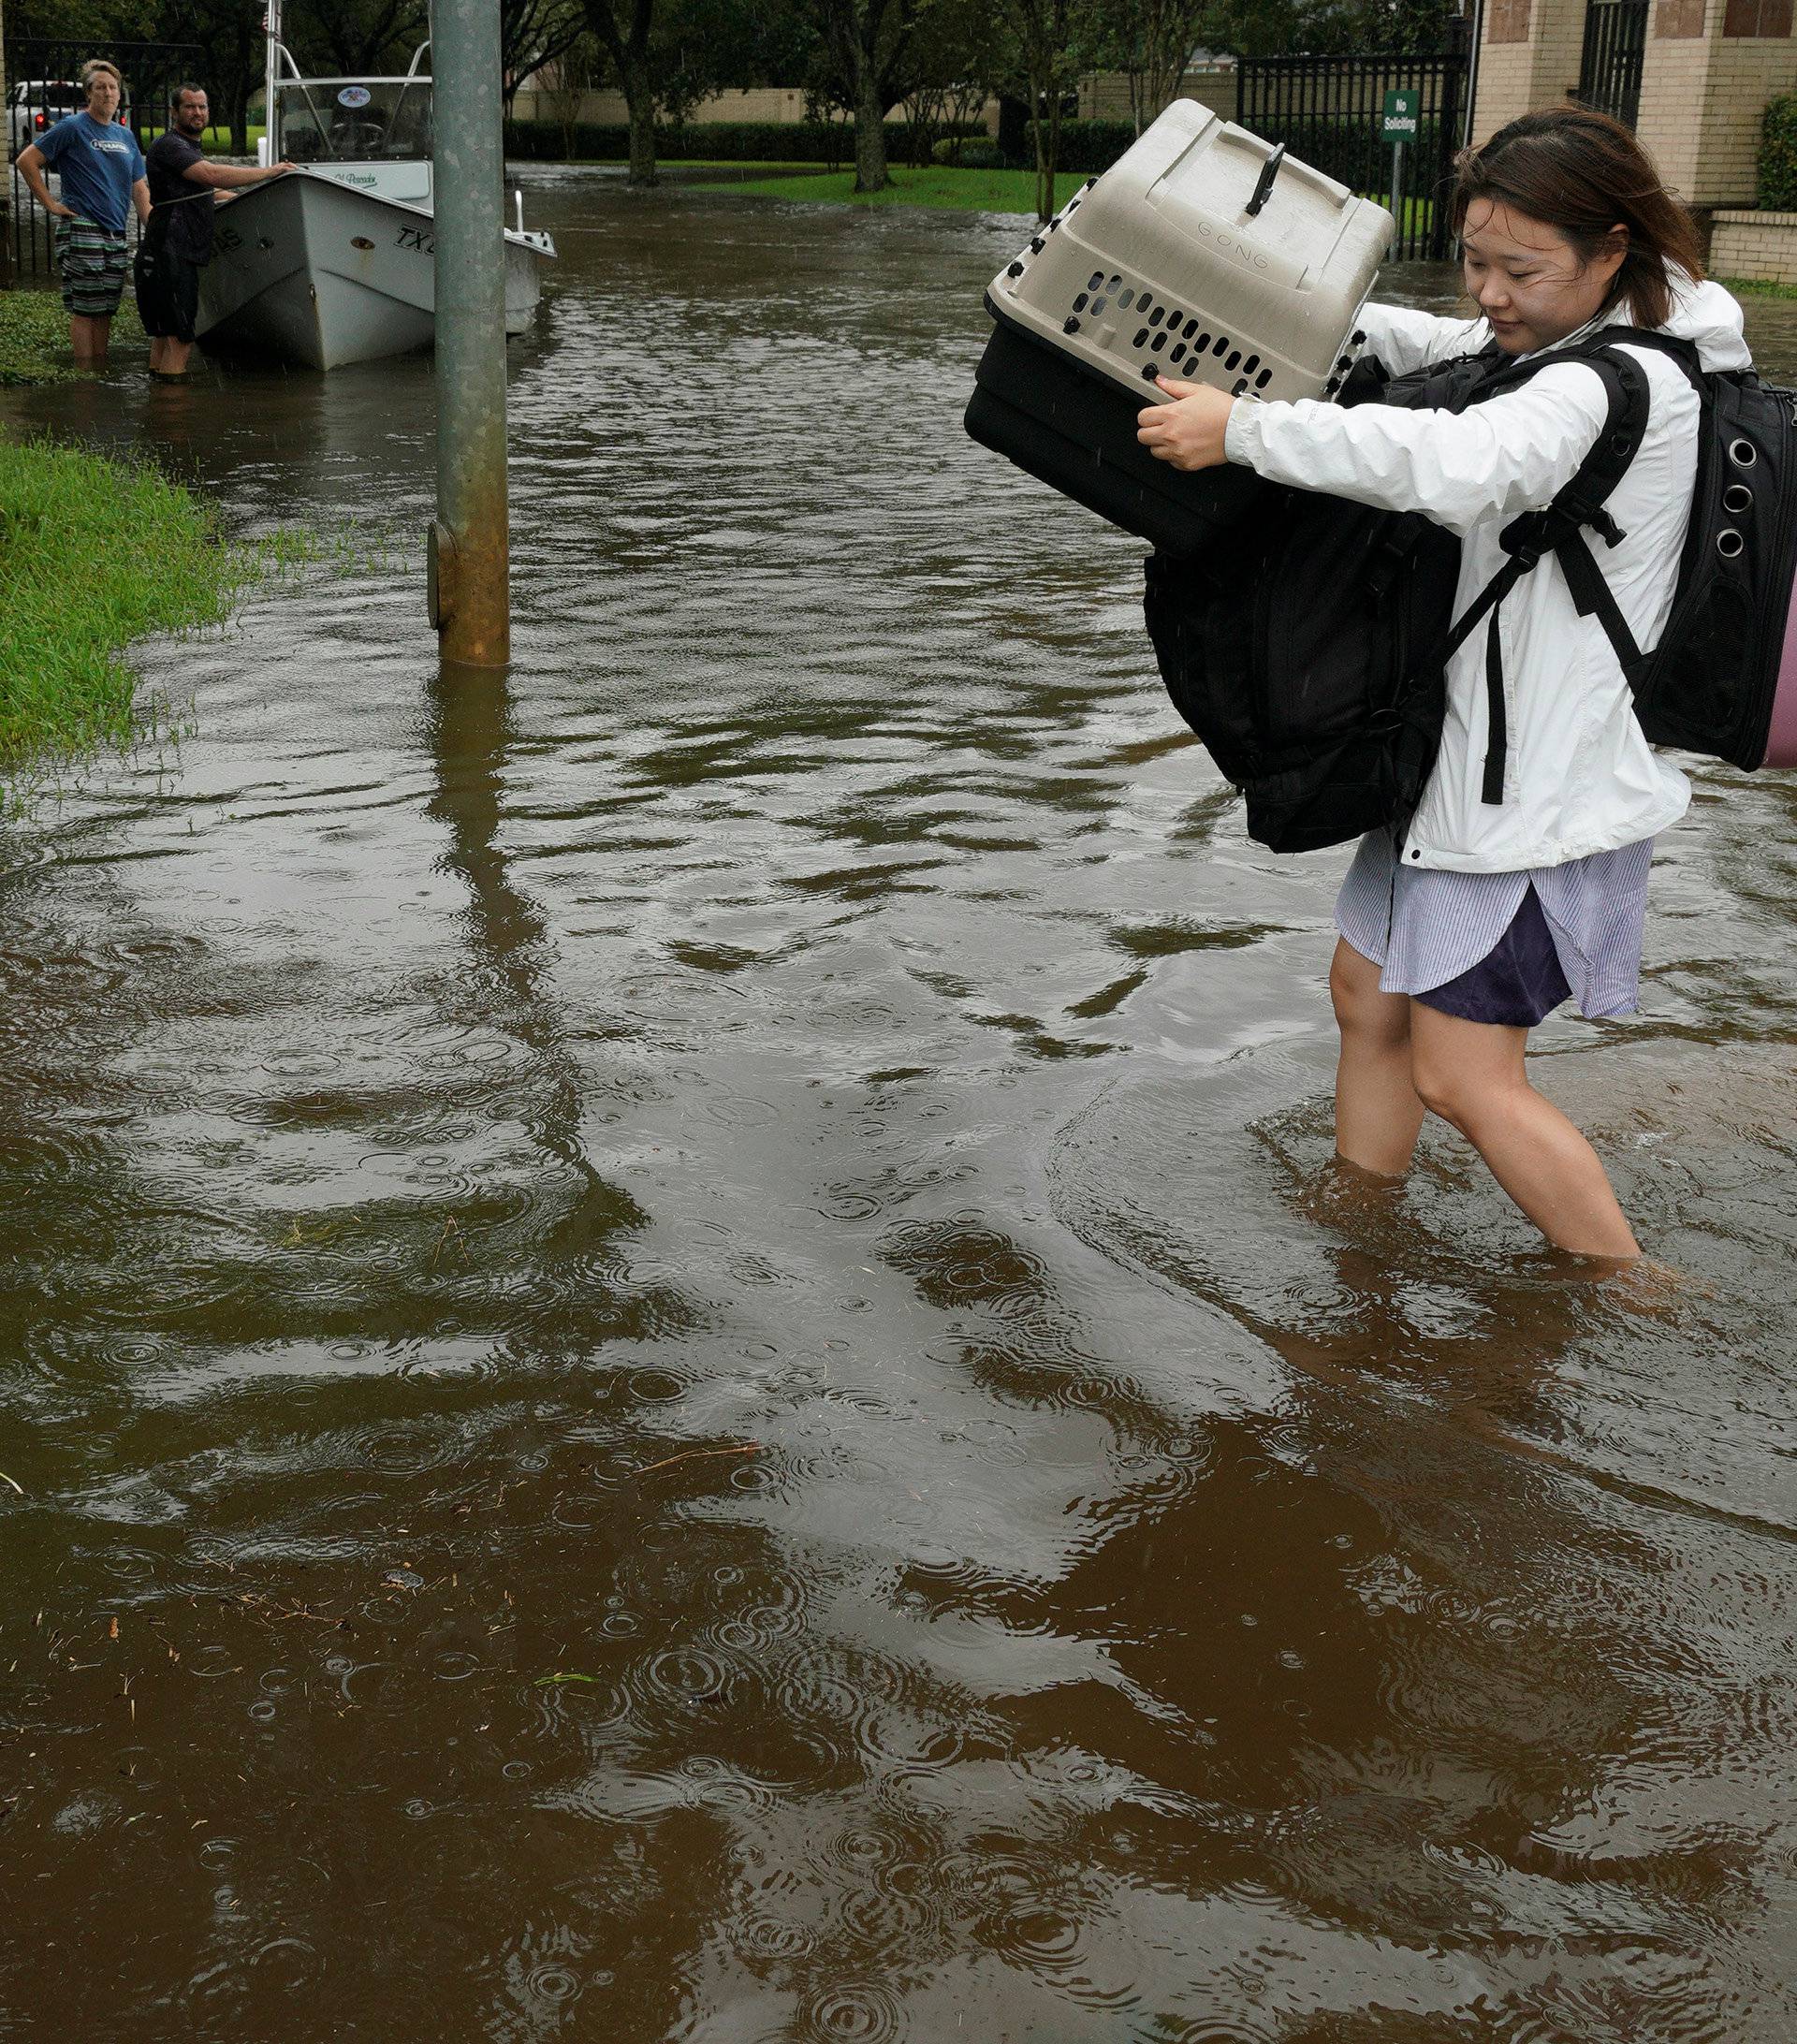 A woman holds a carrier with her pet after being evacuated by boat from the Hurricane Harvey floodwaters in Houston